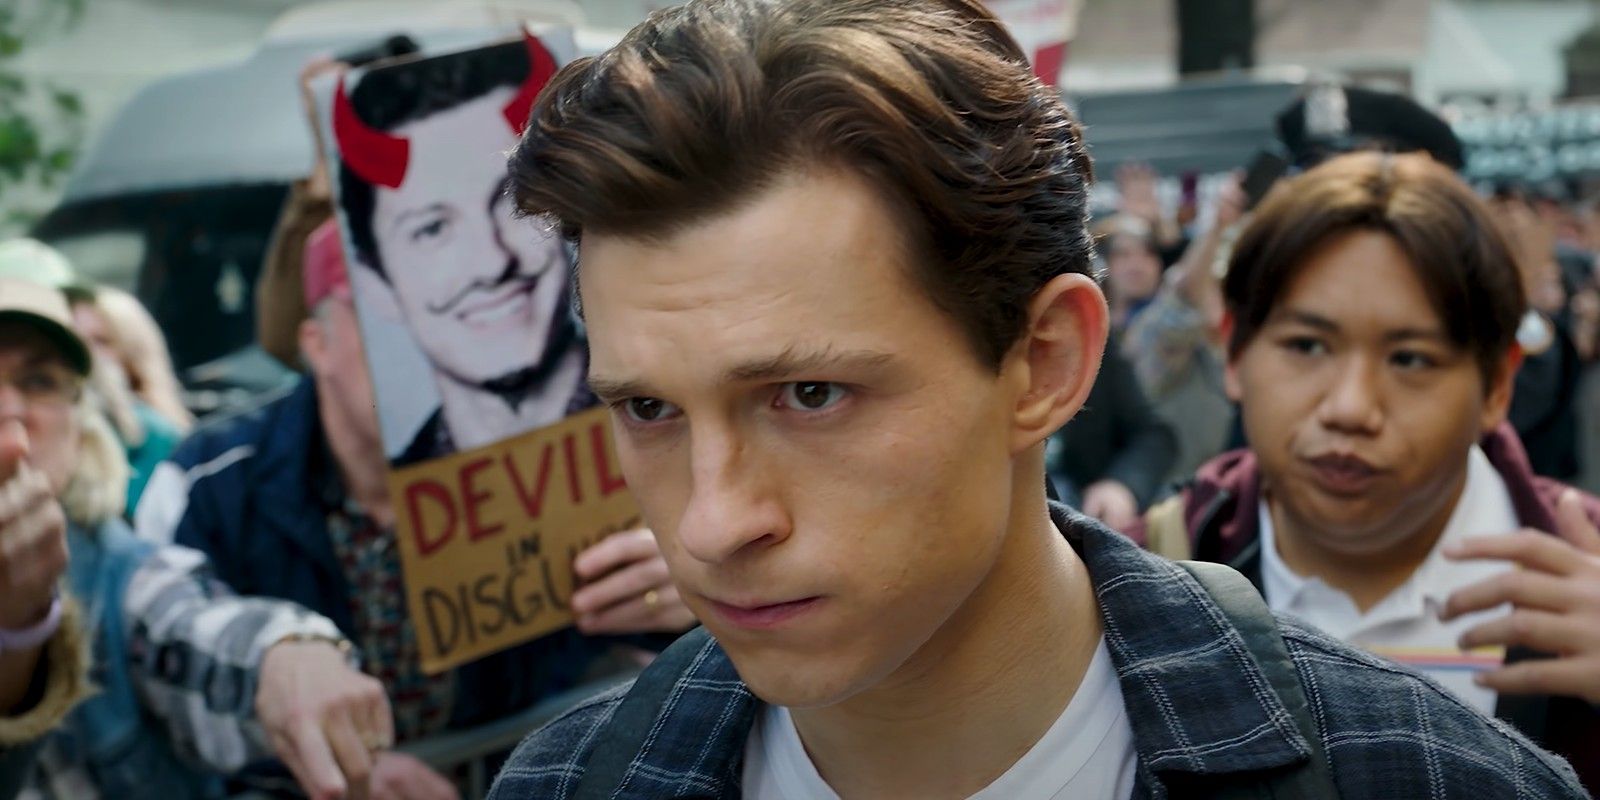 Peter walking through a crowd while looking sad in Spider-Man No Way Home fame